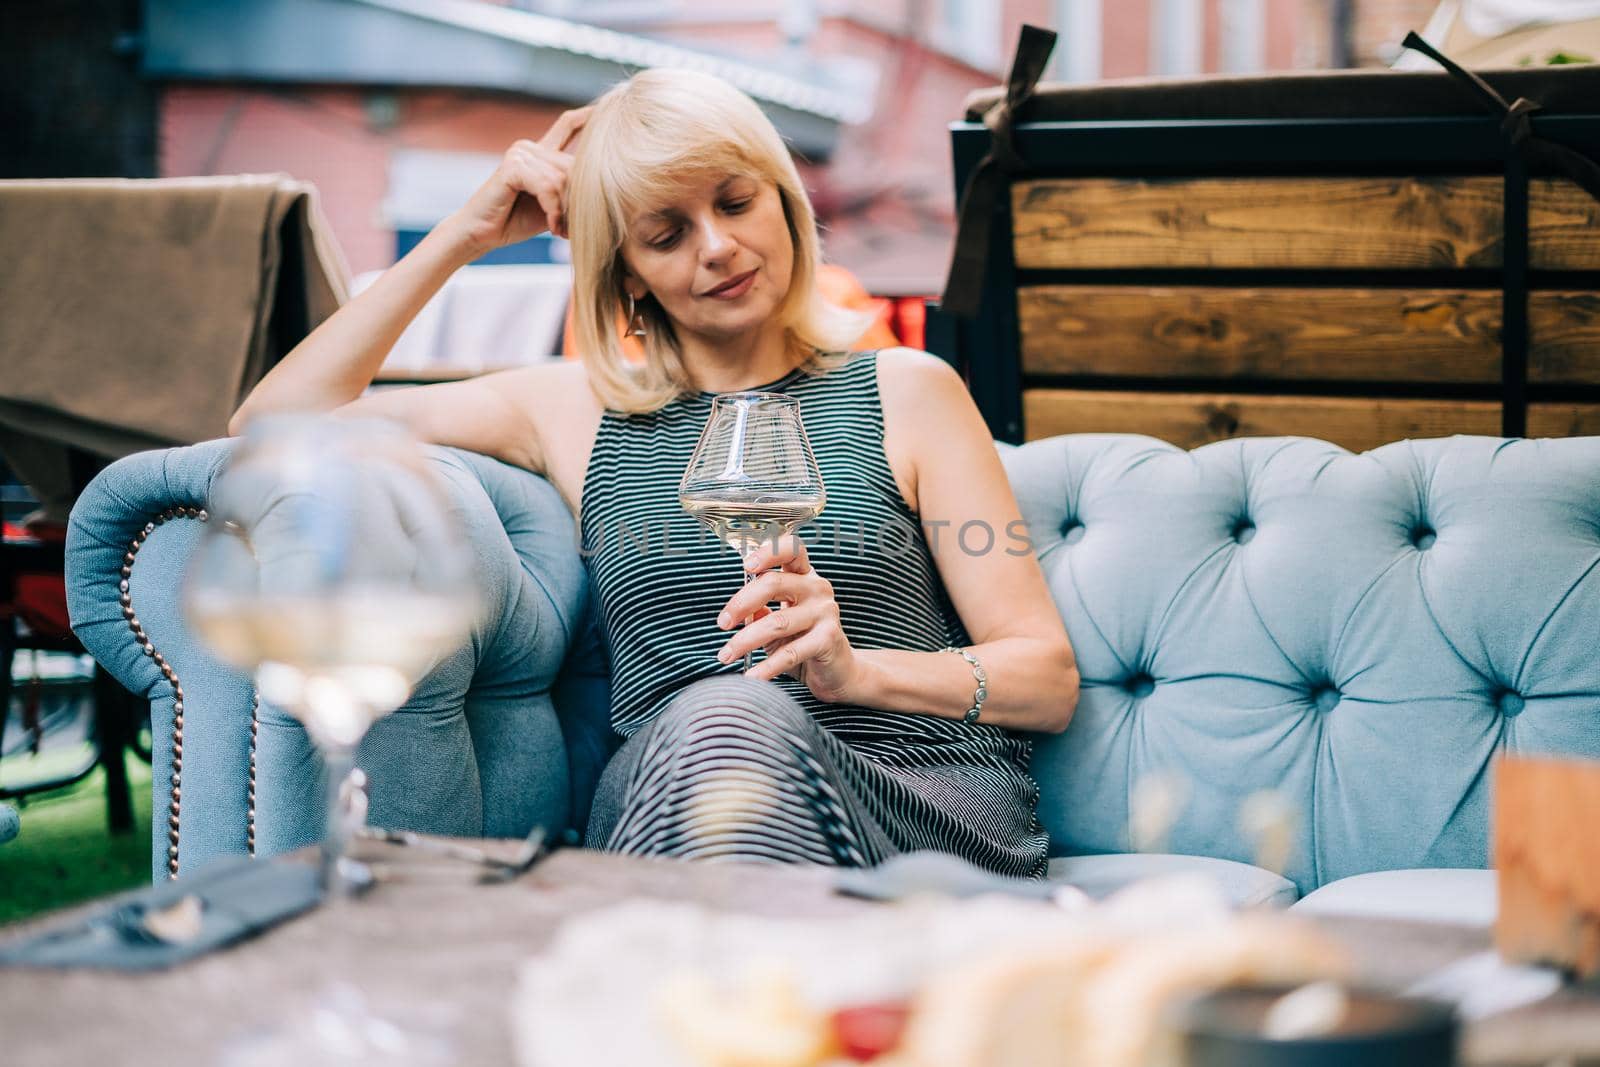 Mature adult woman sitting in bar outdoors with wine glasses and blurry restaurant background scene, drinking white wine and eating cheese. Summer sunny day on patio outdoors.